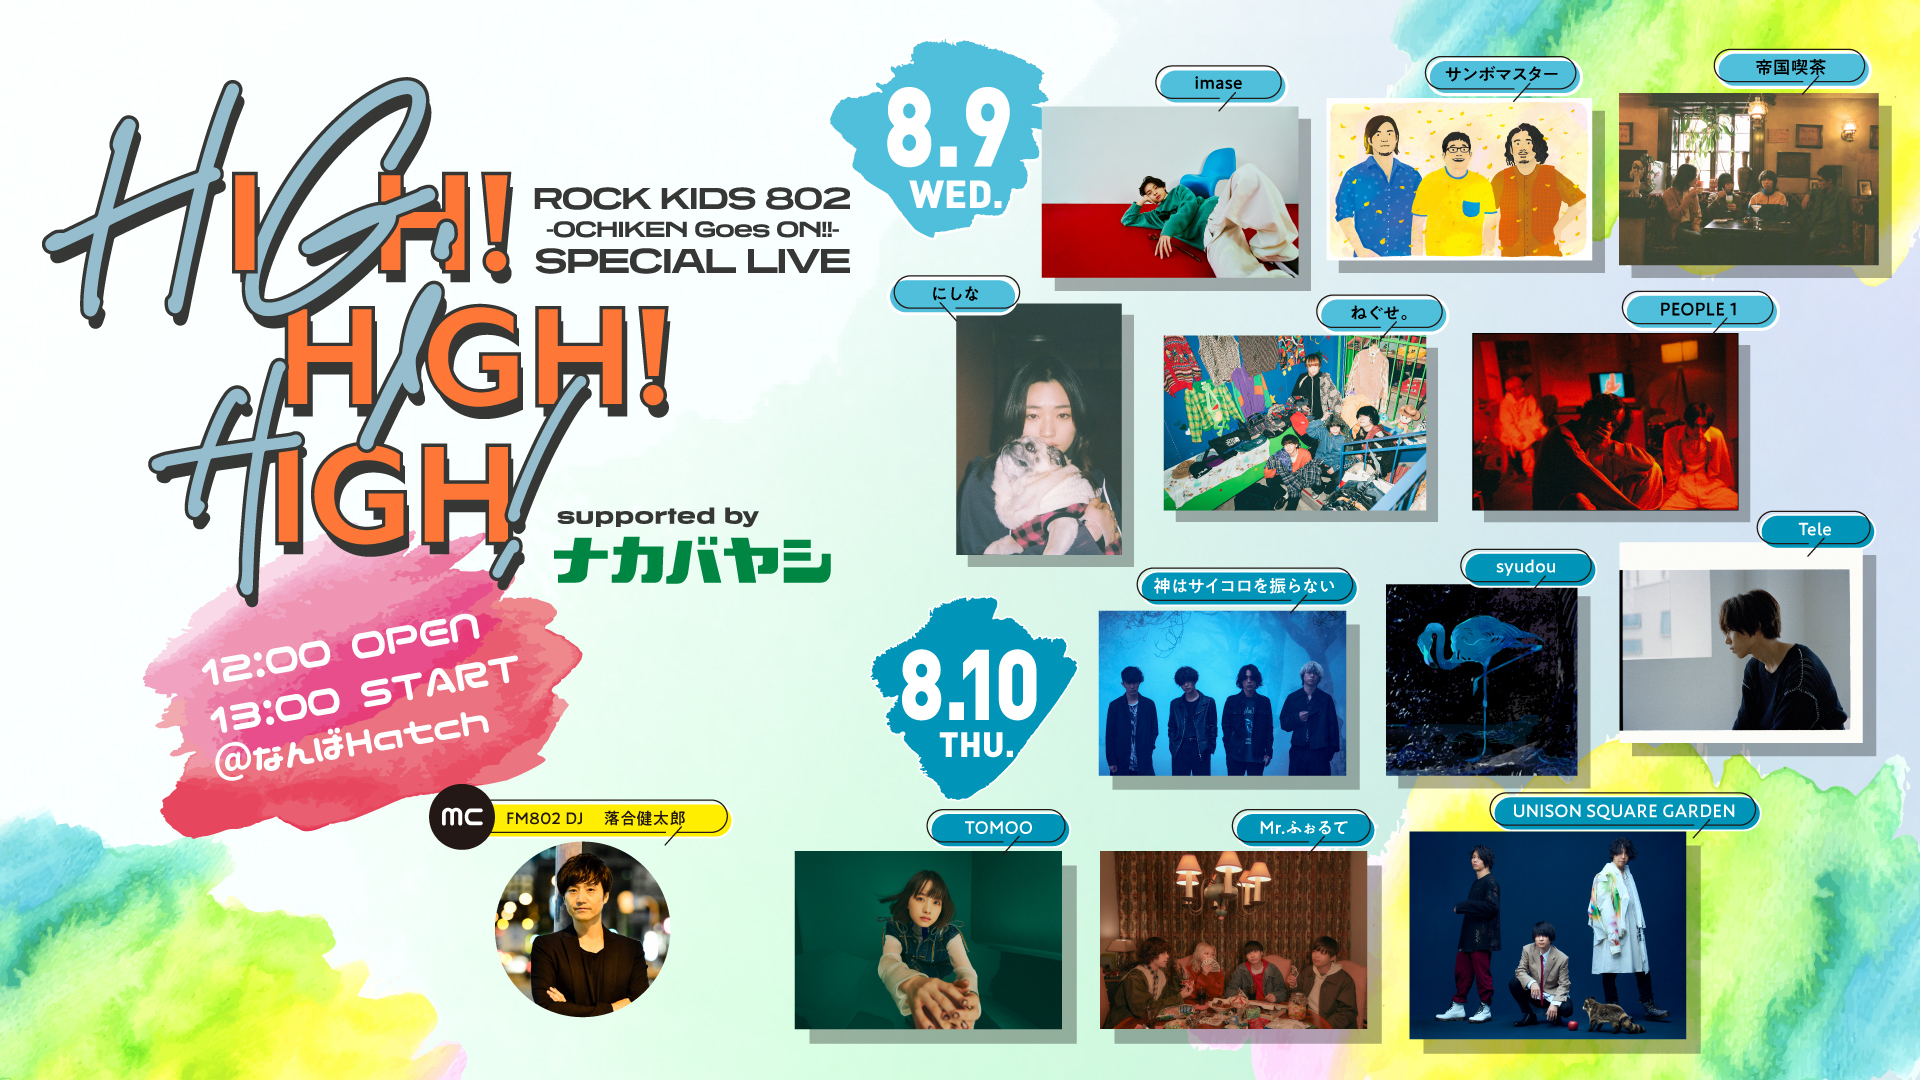 『ROCKK KIDS 802-OCHIKEN Goes ON!!-SPECIAL LIVE HIGH!HIGH!HIGH! supported by ナカバヤシ』